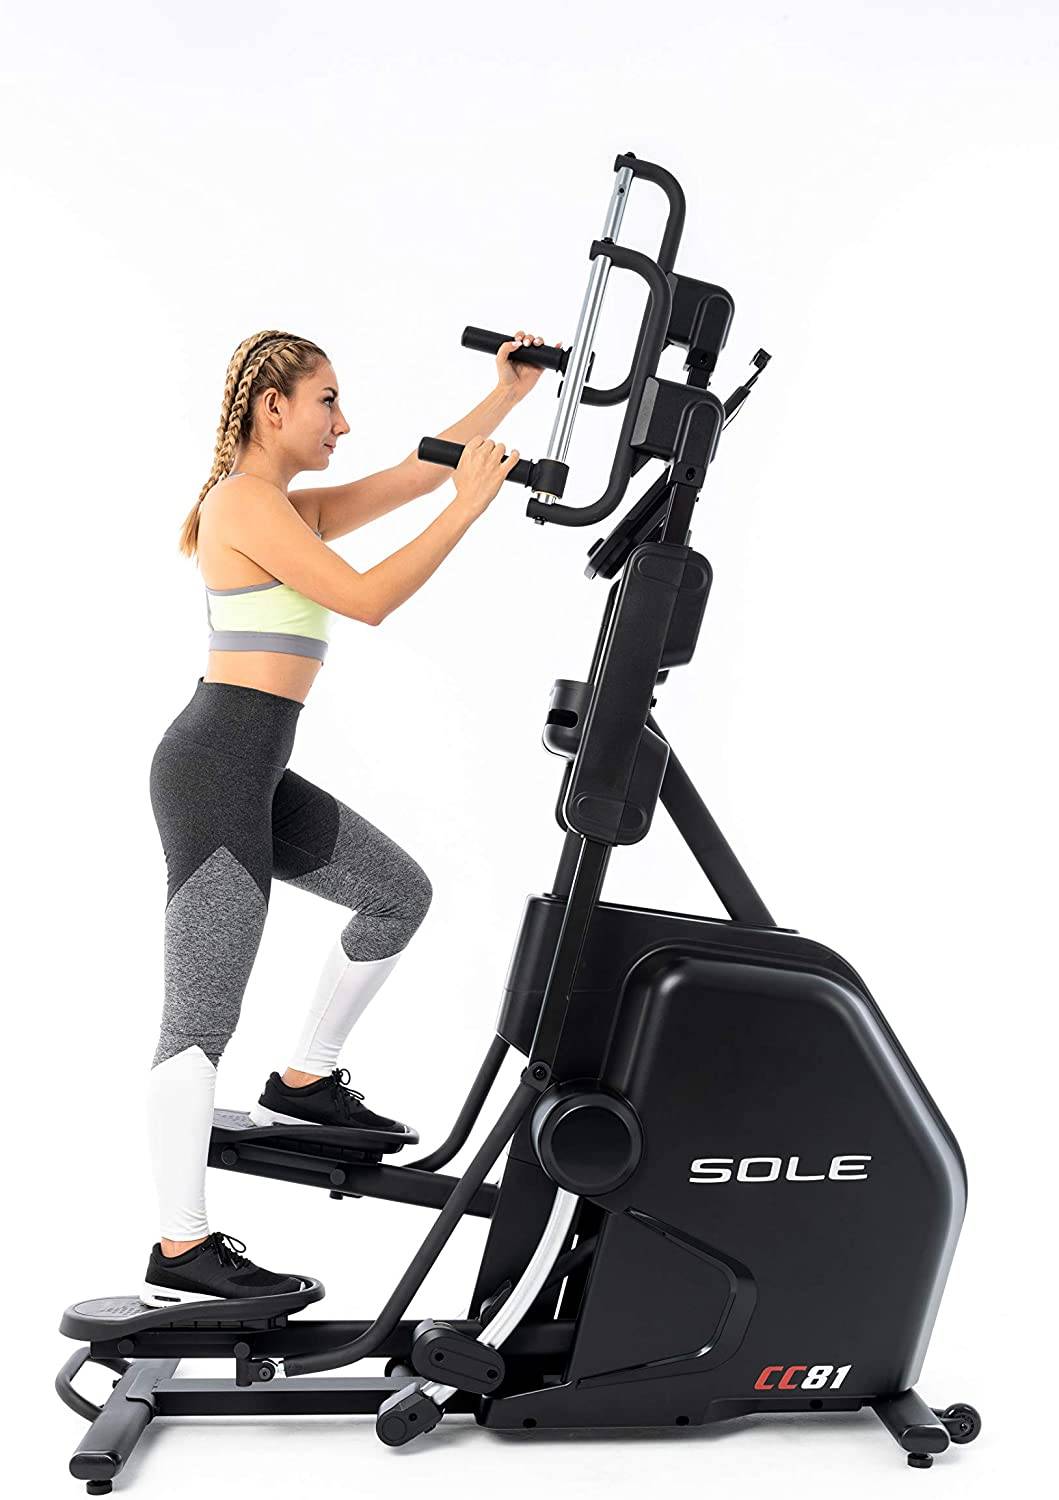  Cardio Workout Gym Equipment for push your ABS